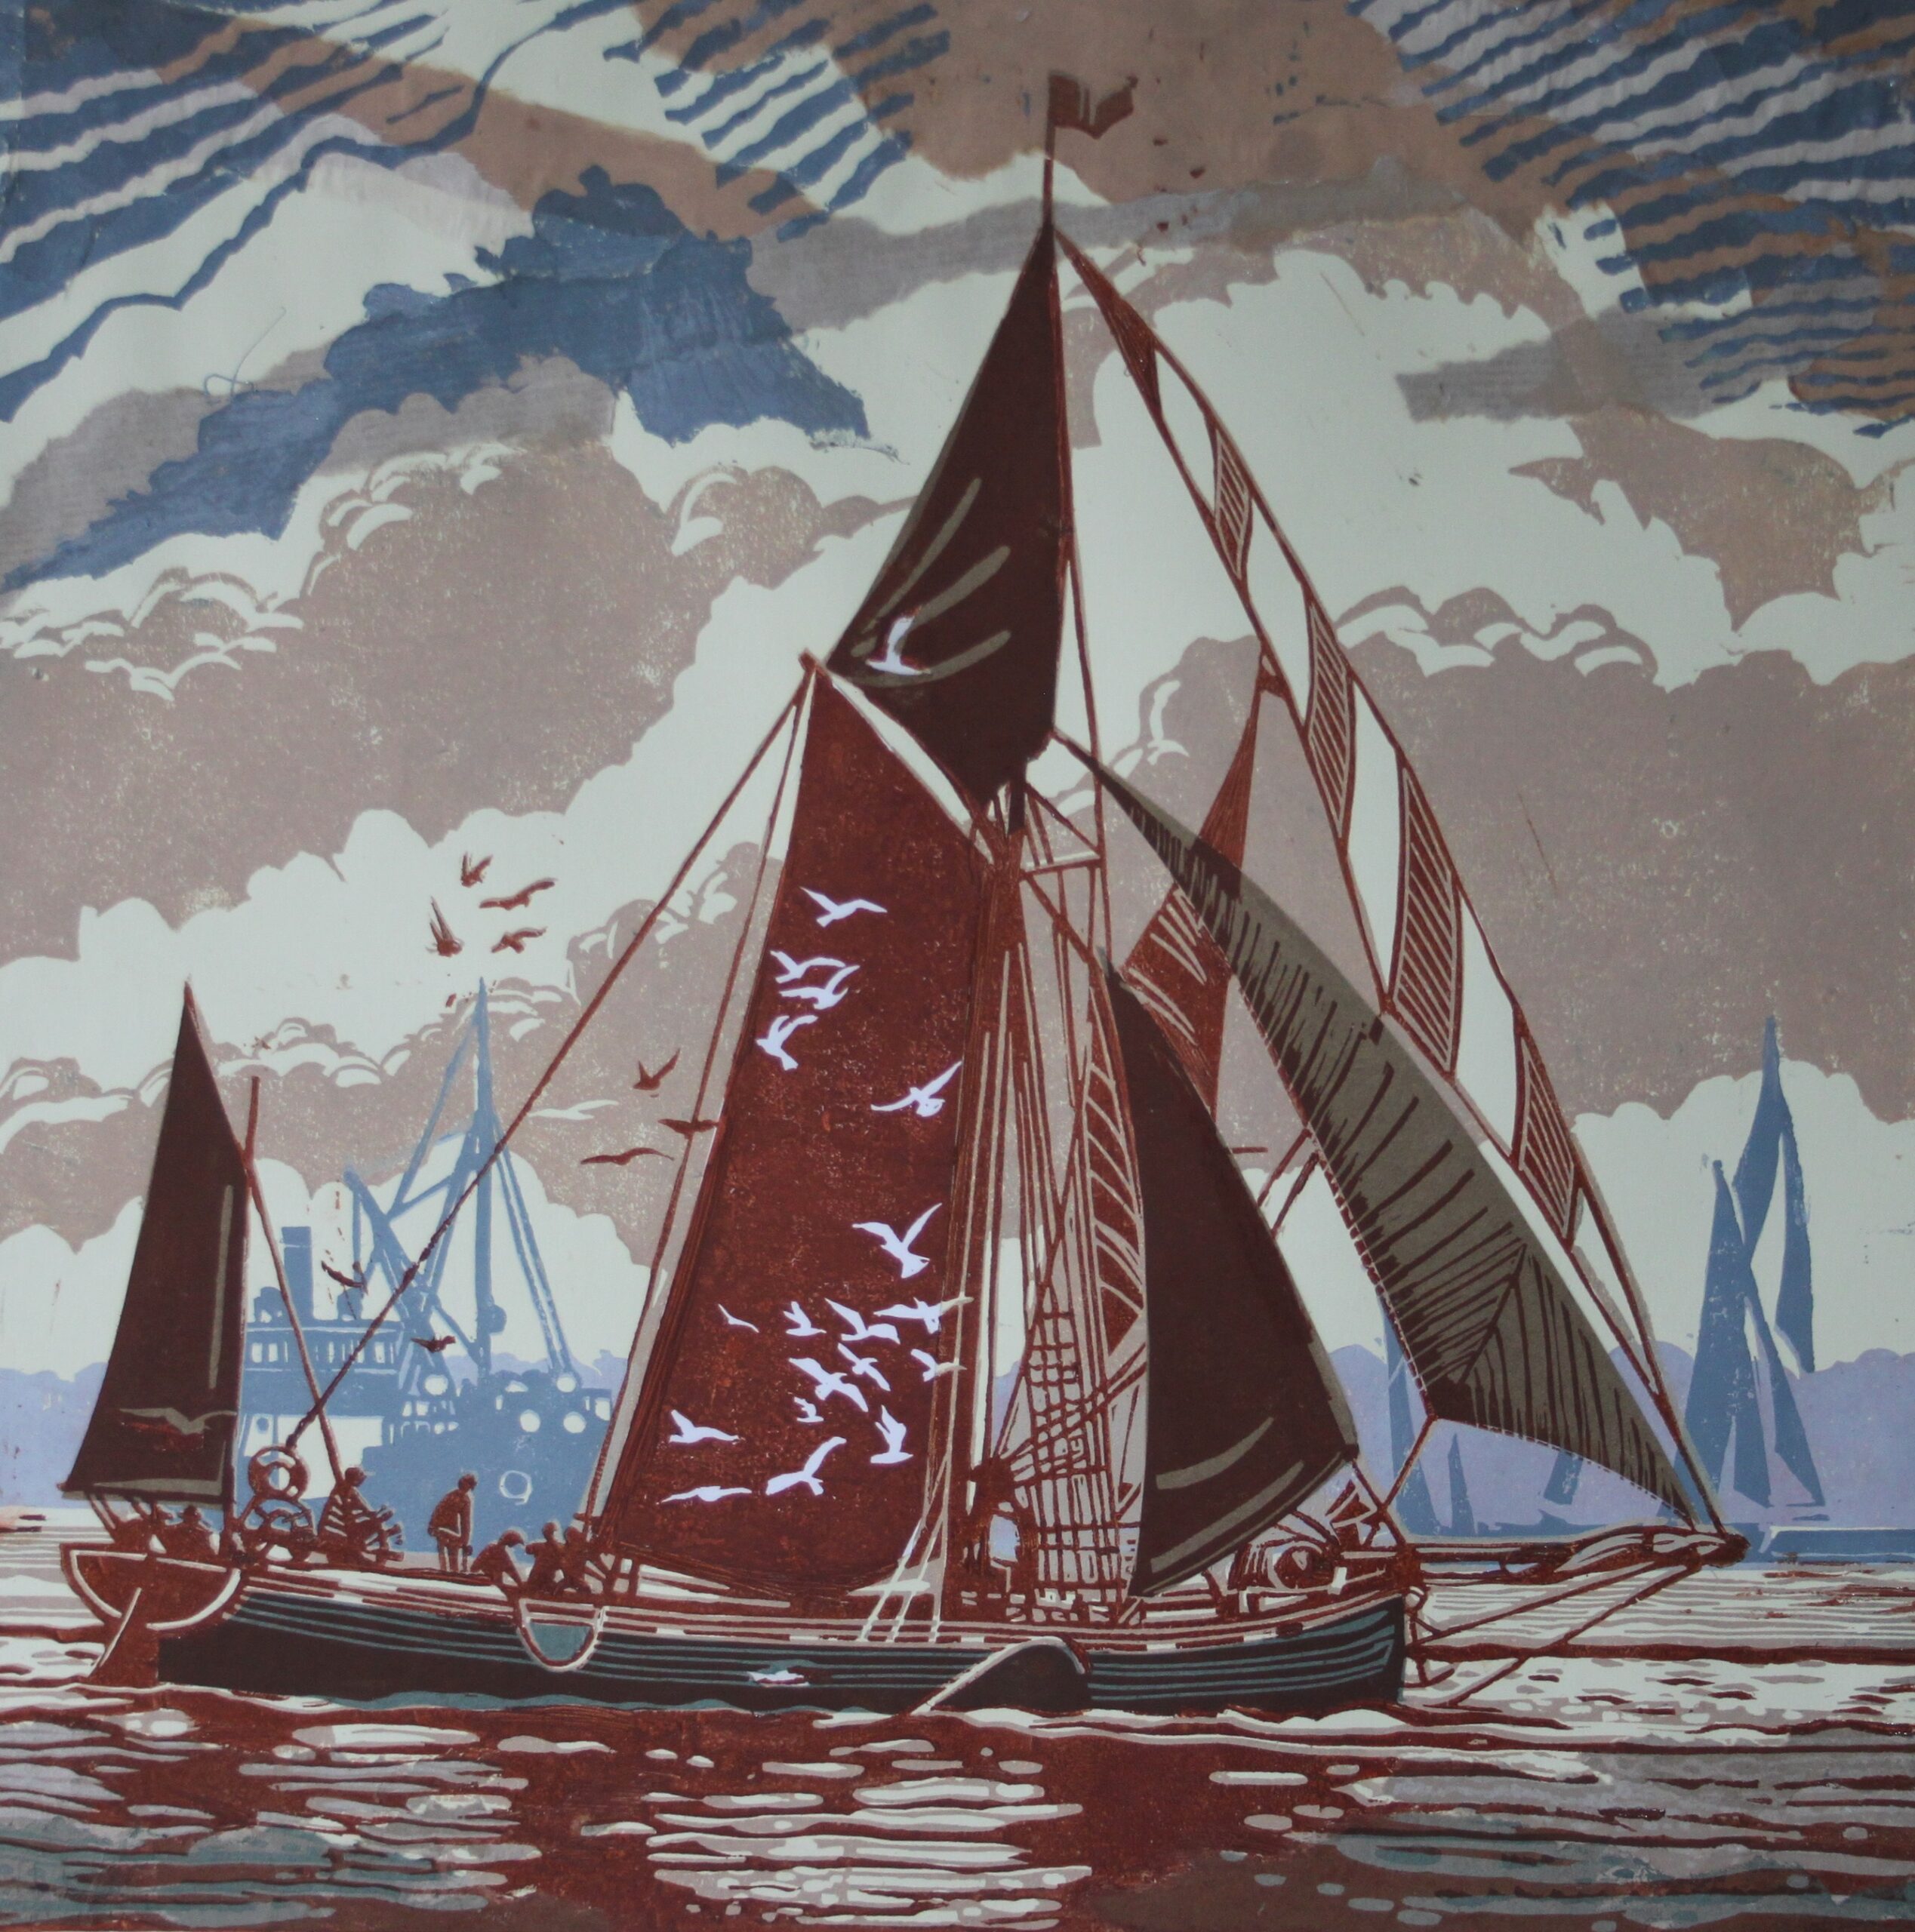 Red and blue print of boats on the sea